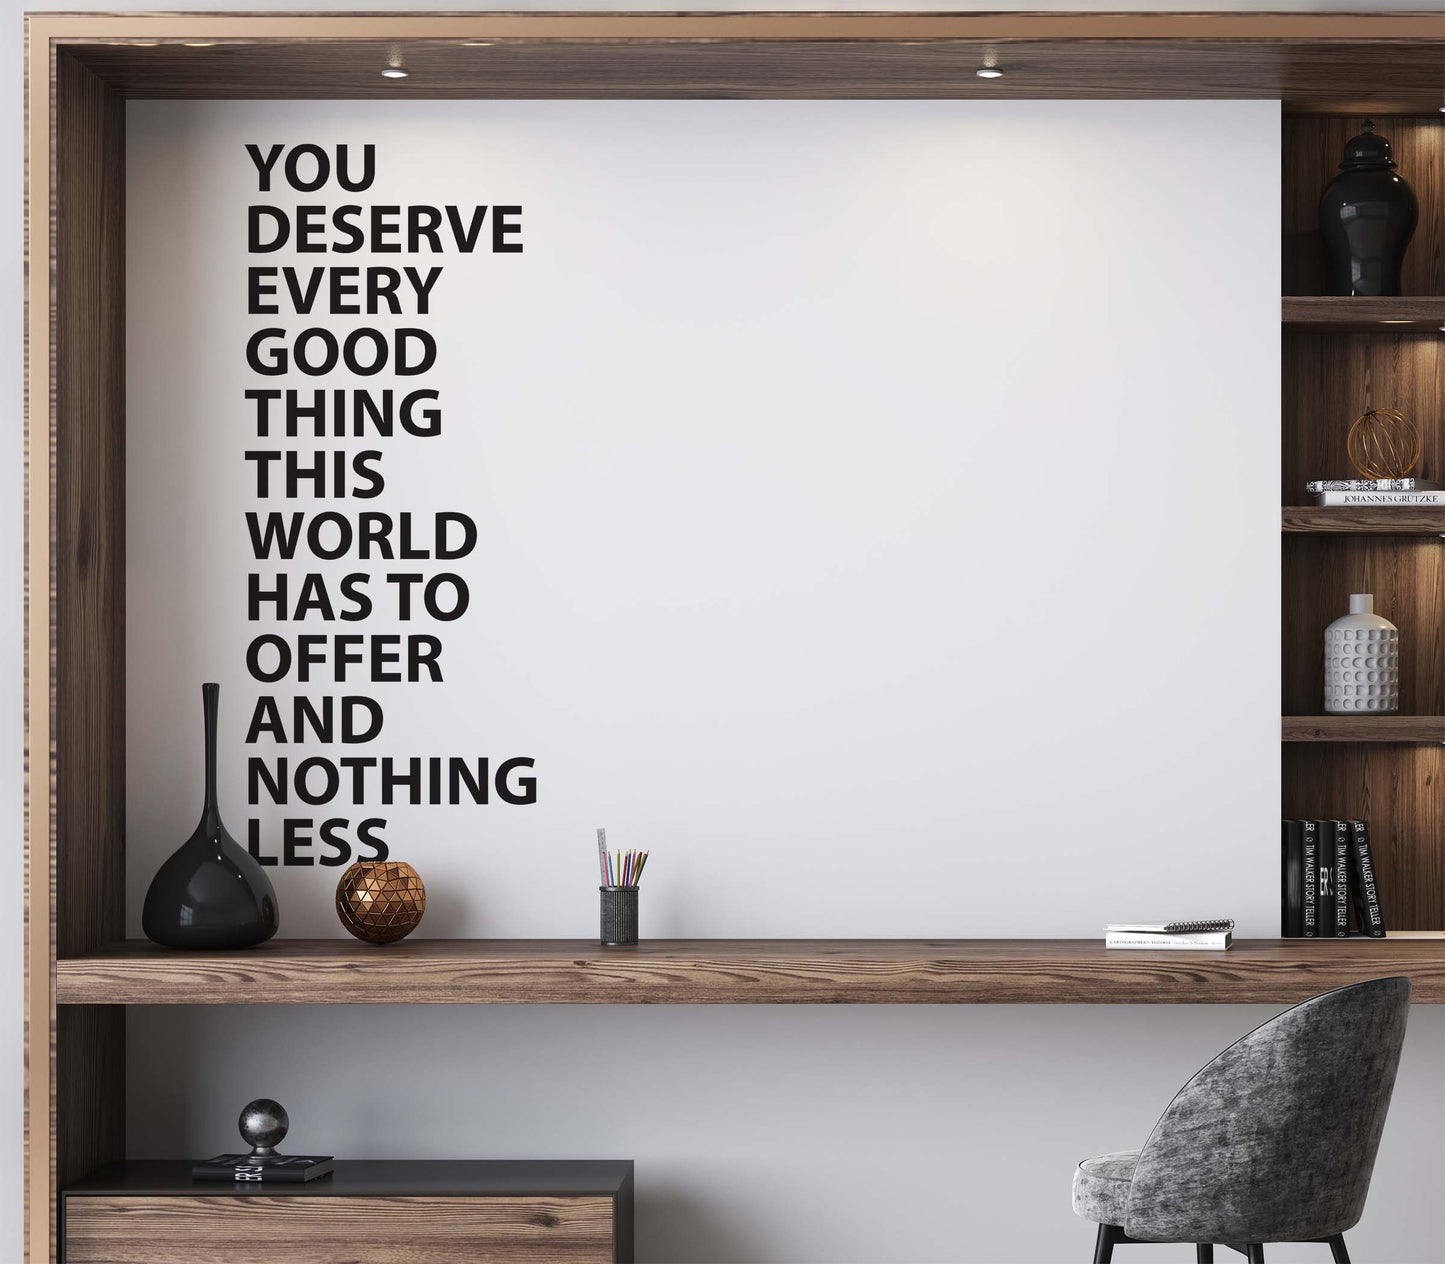 Motivational Quote Wall Decal. You Deserve Every Good Thing This World Has To Offer And Nothing Less. #6544